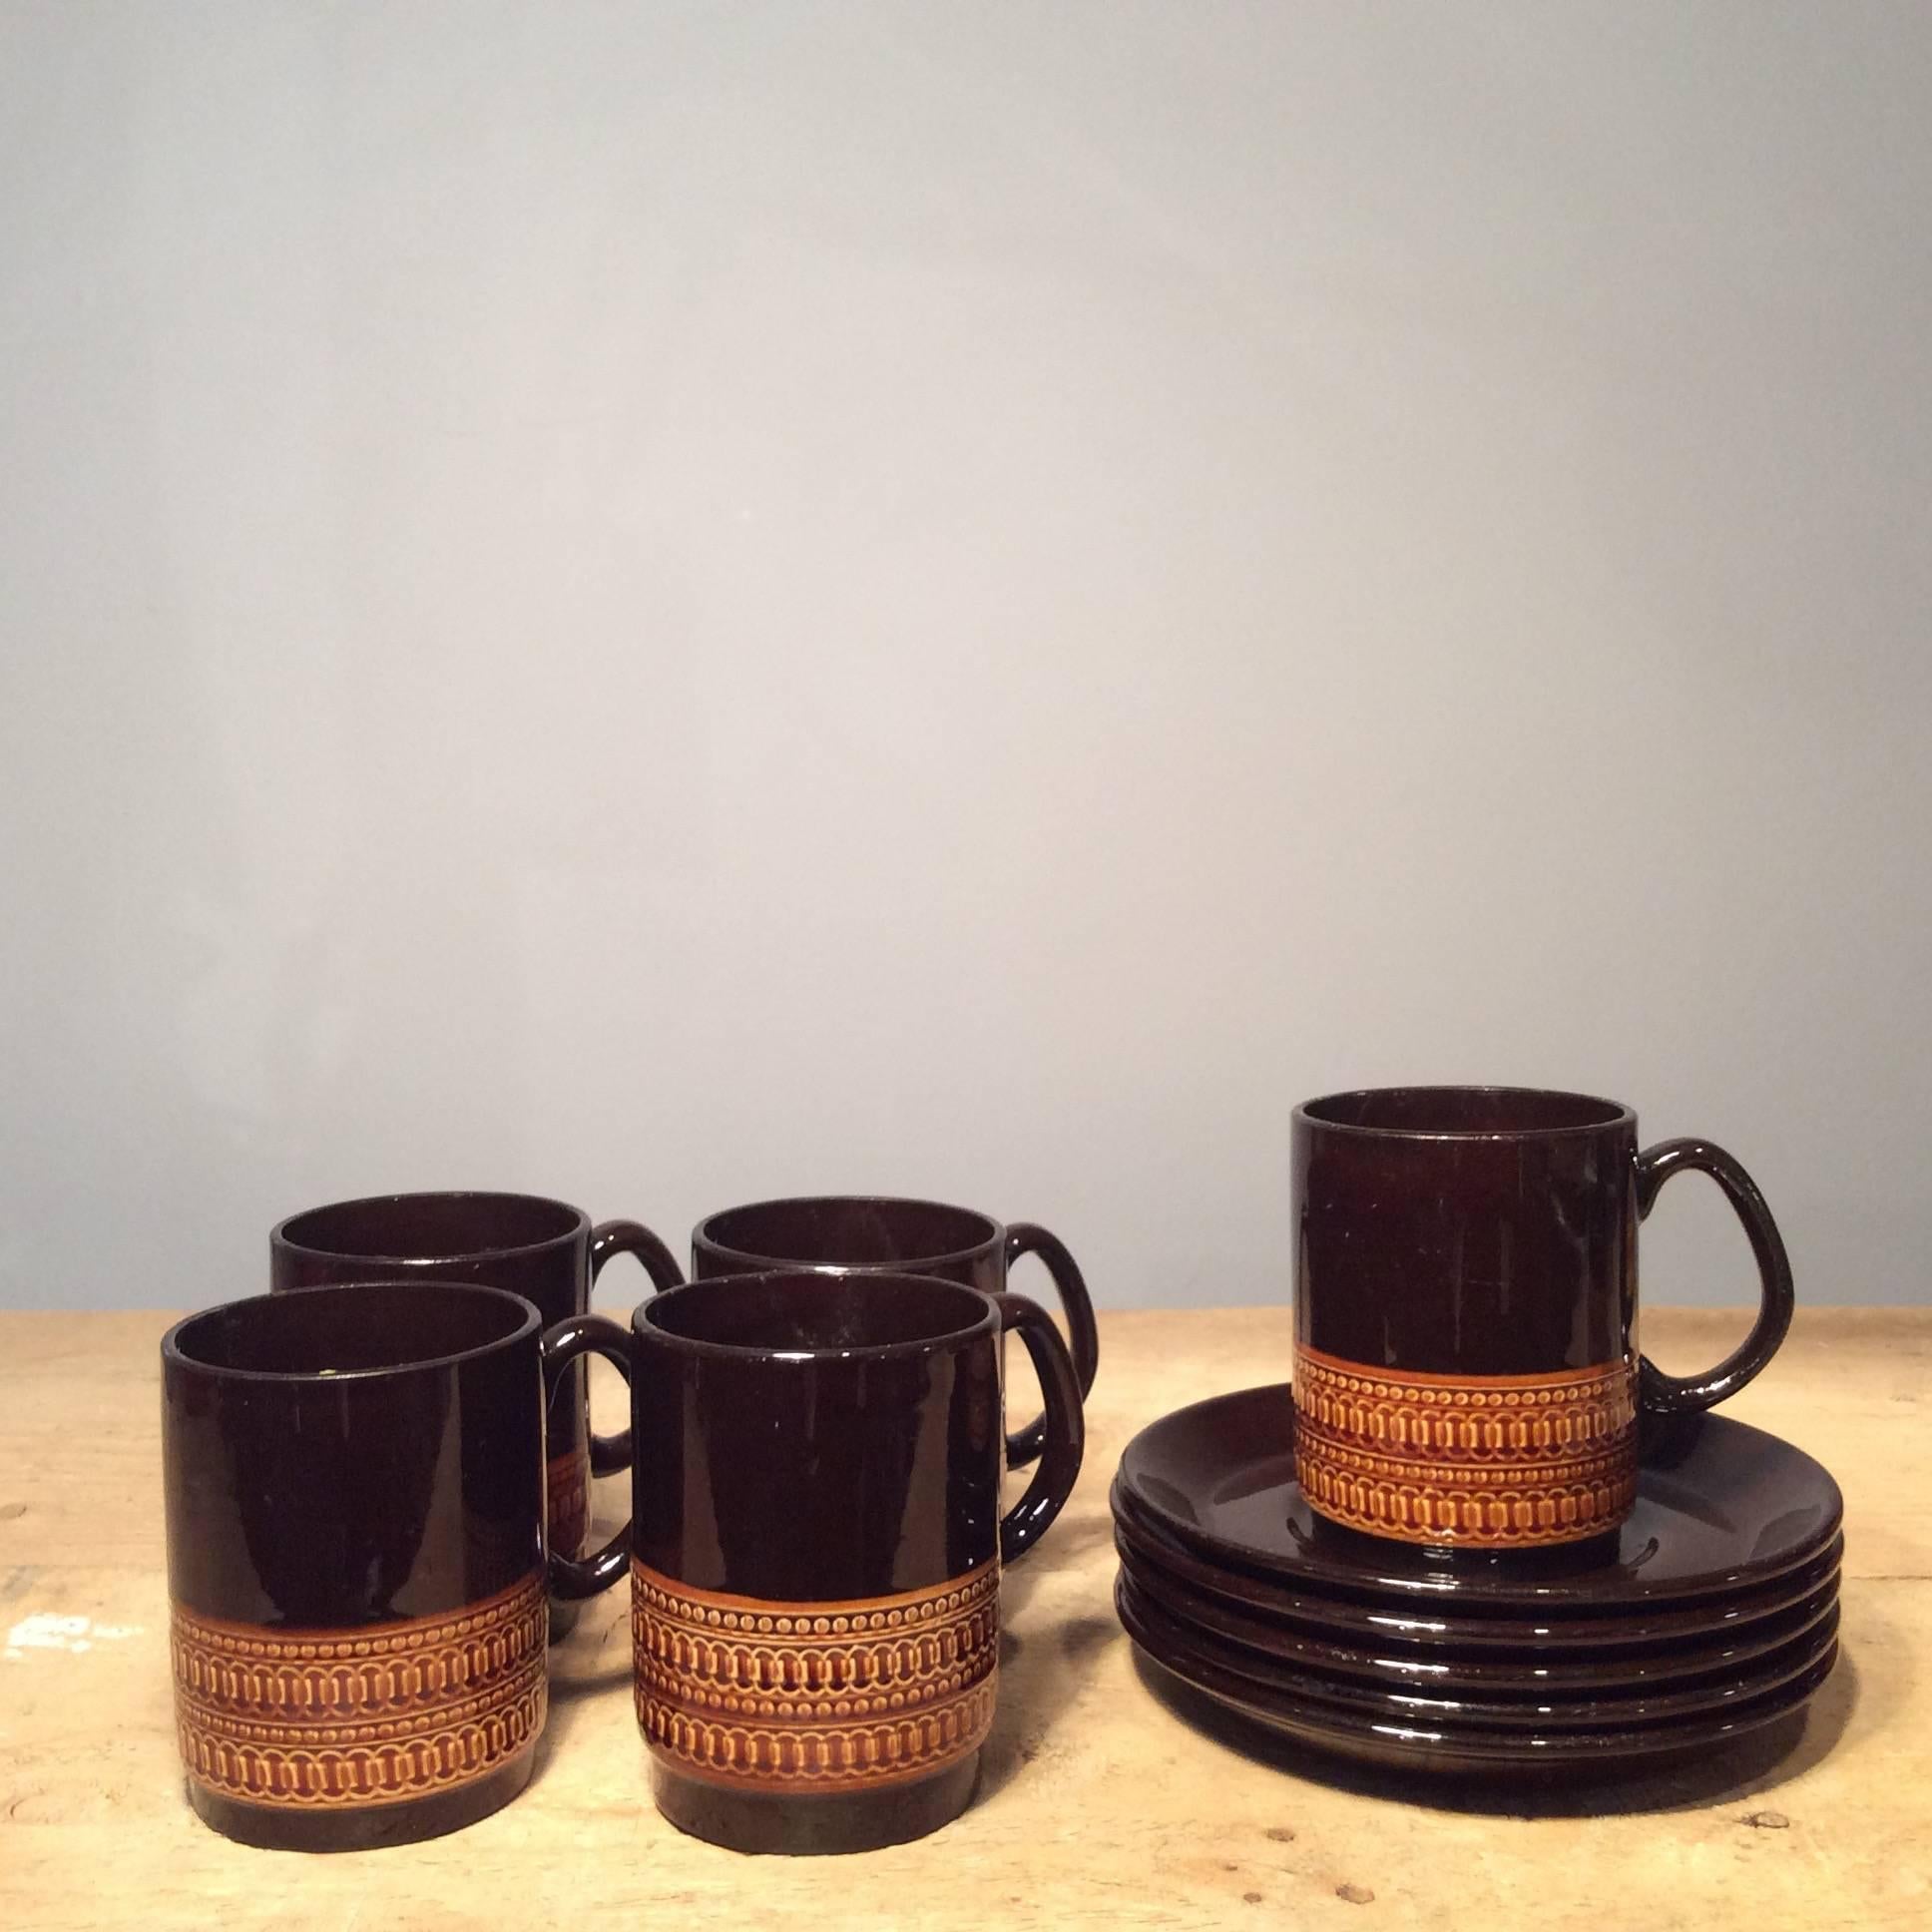 Elegant brown vintage coffee set with repeat design and simple silhouette.

Pot: Height 23cm, diameter 11cm.
Mug: Height 8.5cm, diameter 6.5cm.
Milk jug: Height 8.5cm, diameter 6.5cm.
Sugar bowl: Height 6cm, diameter 8cm.
Saucer: Diameter